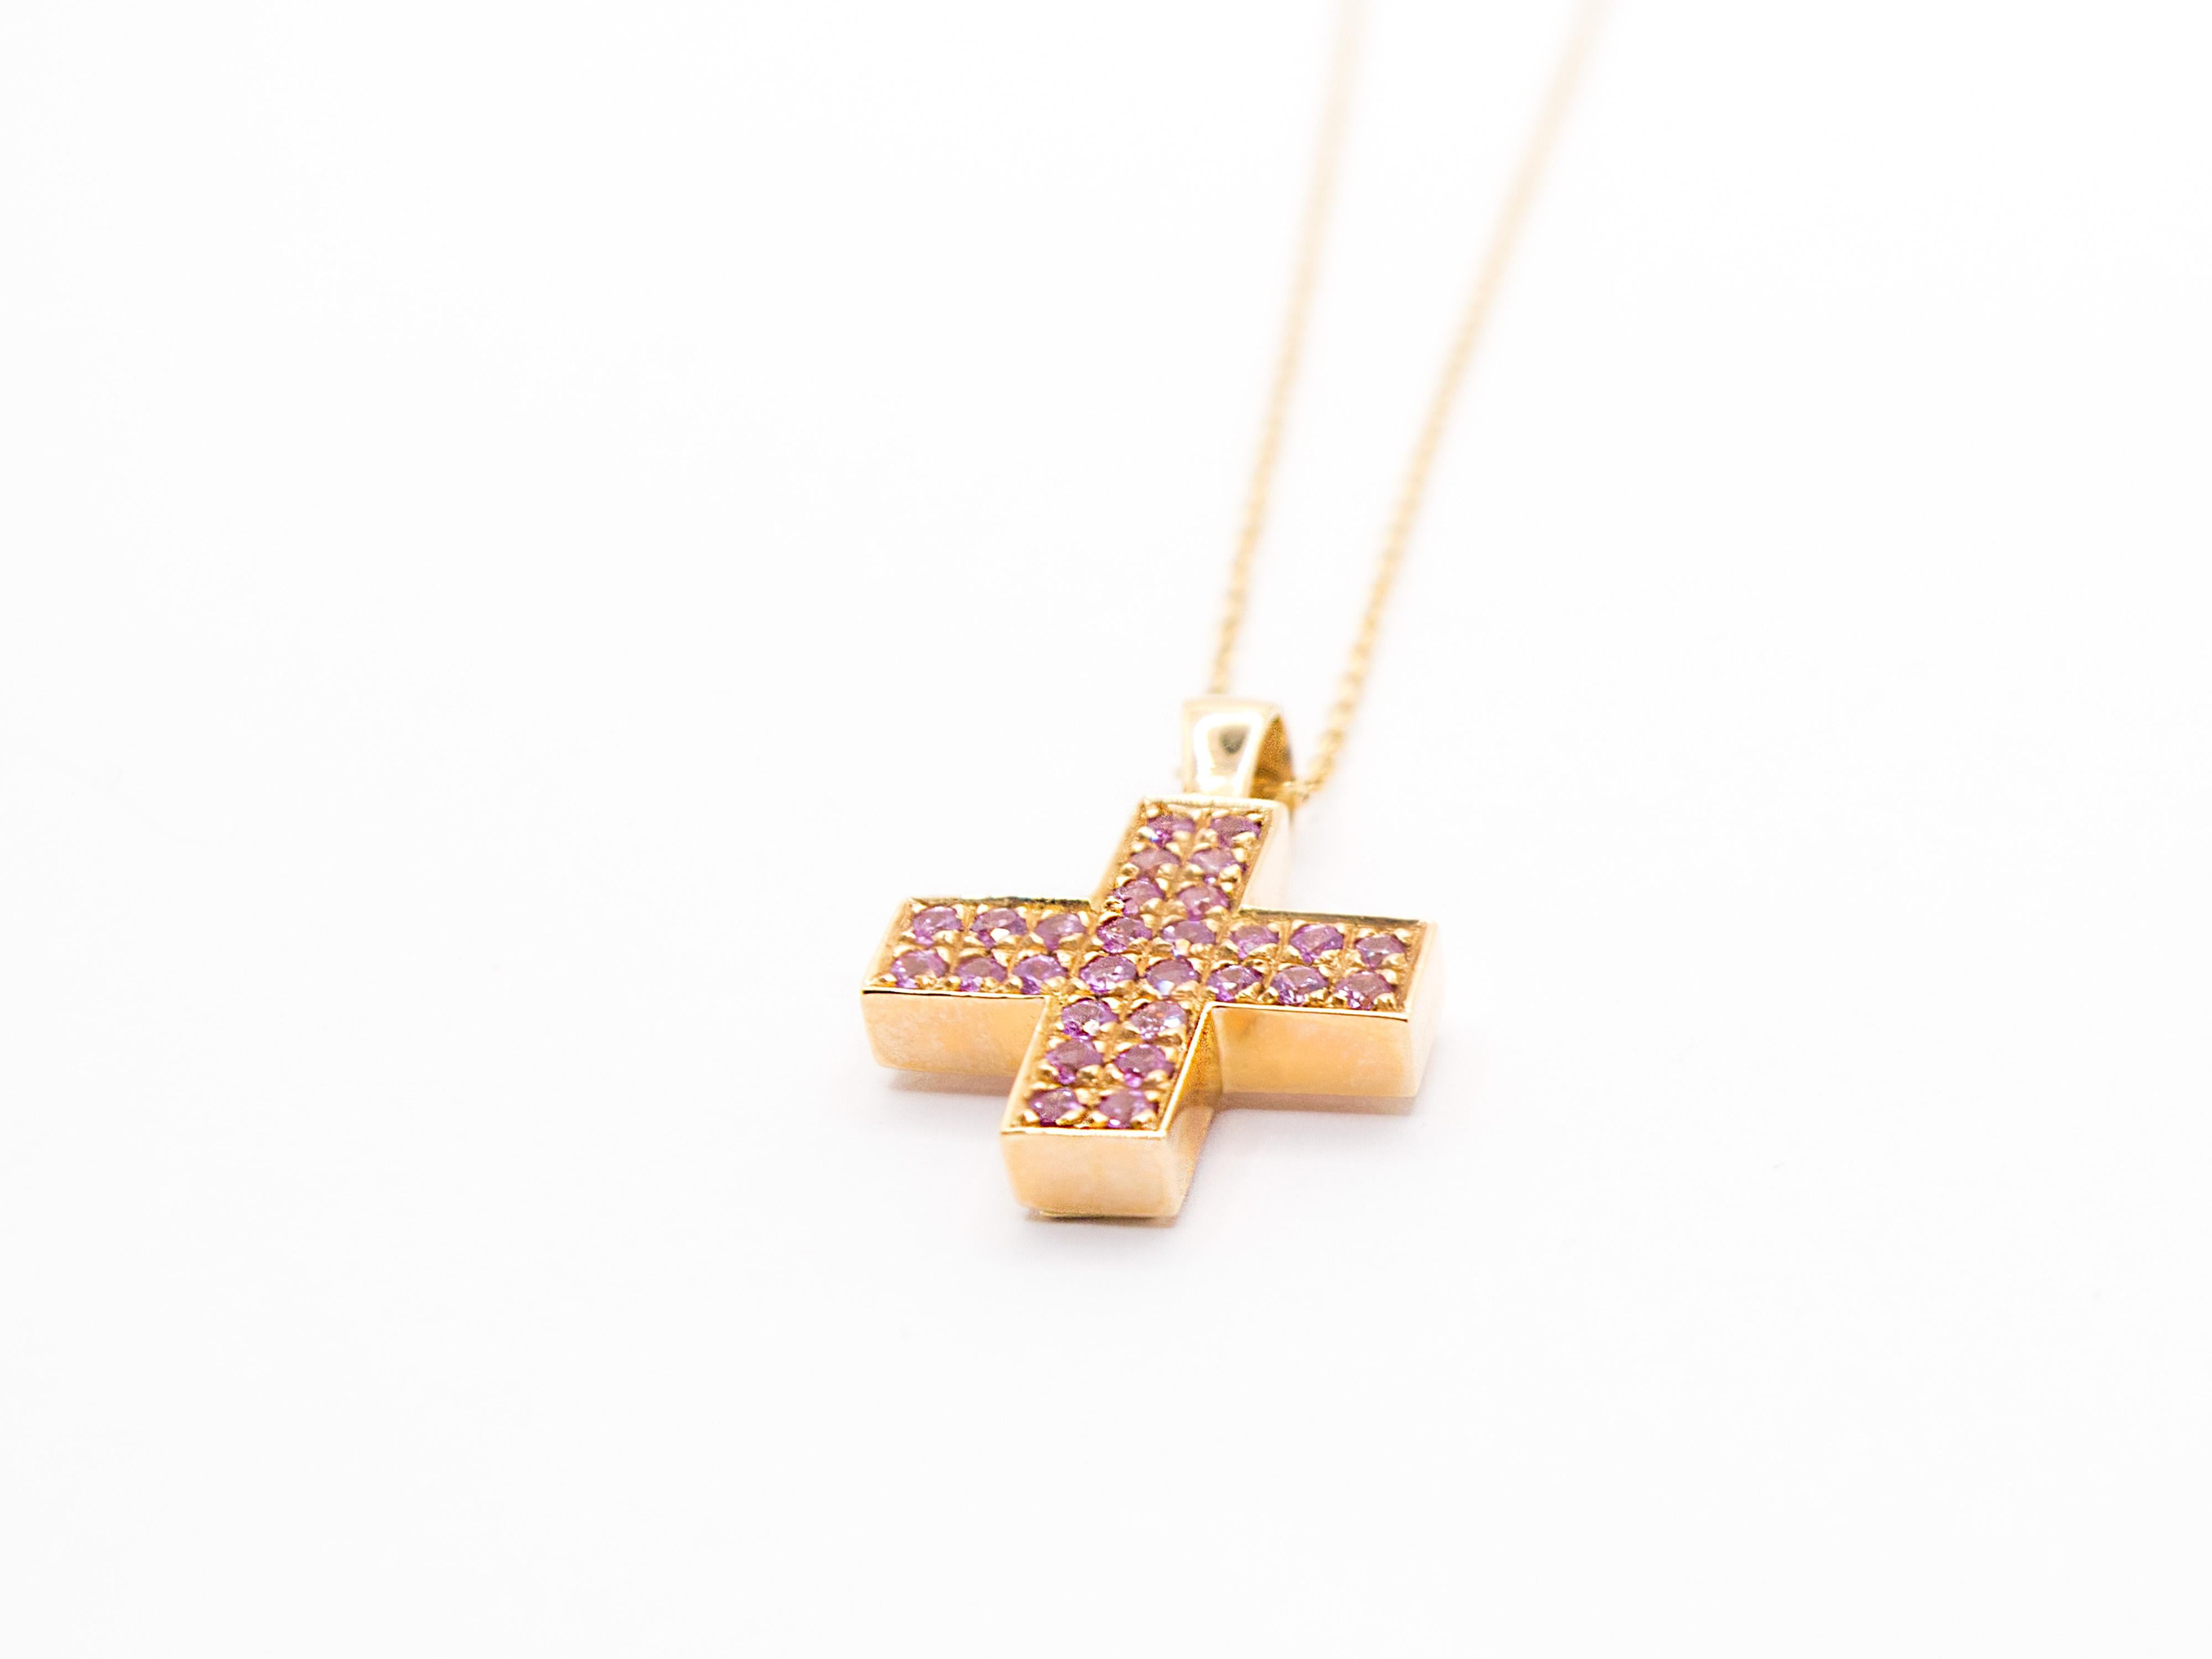 A beautiful 18 kt rose gold choker with a square cross pendant ( Latin cross ).
The pendant is embellished with a pavè of round brilliant-cut pink sapphires of intense and refined color.
Sapphires have a weight of ct 0.84.
The cross measures 2.3 x